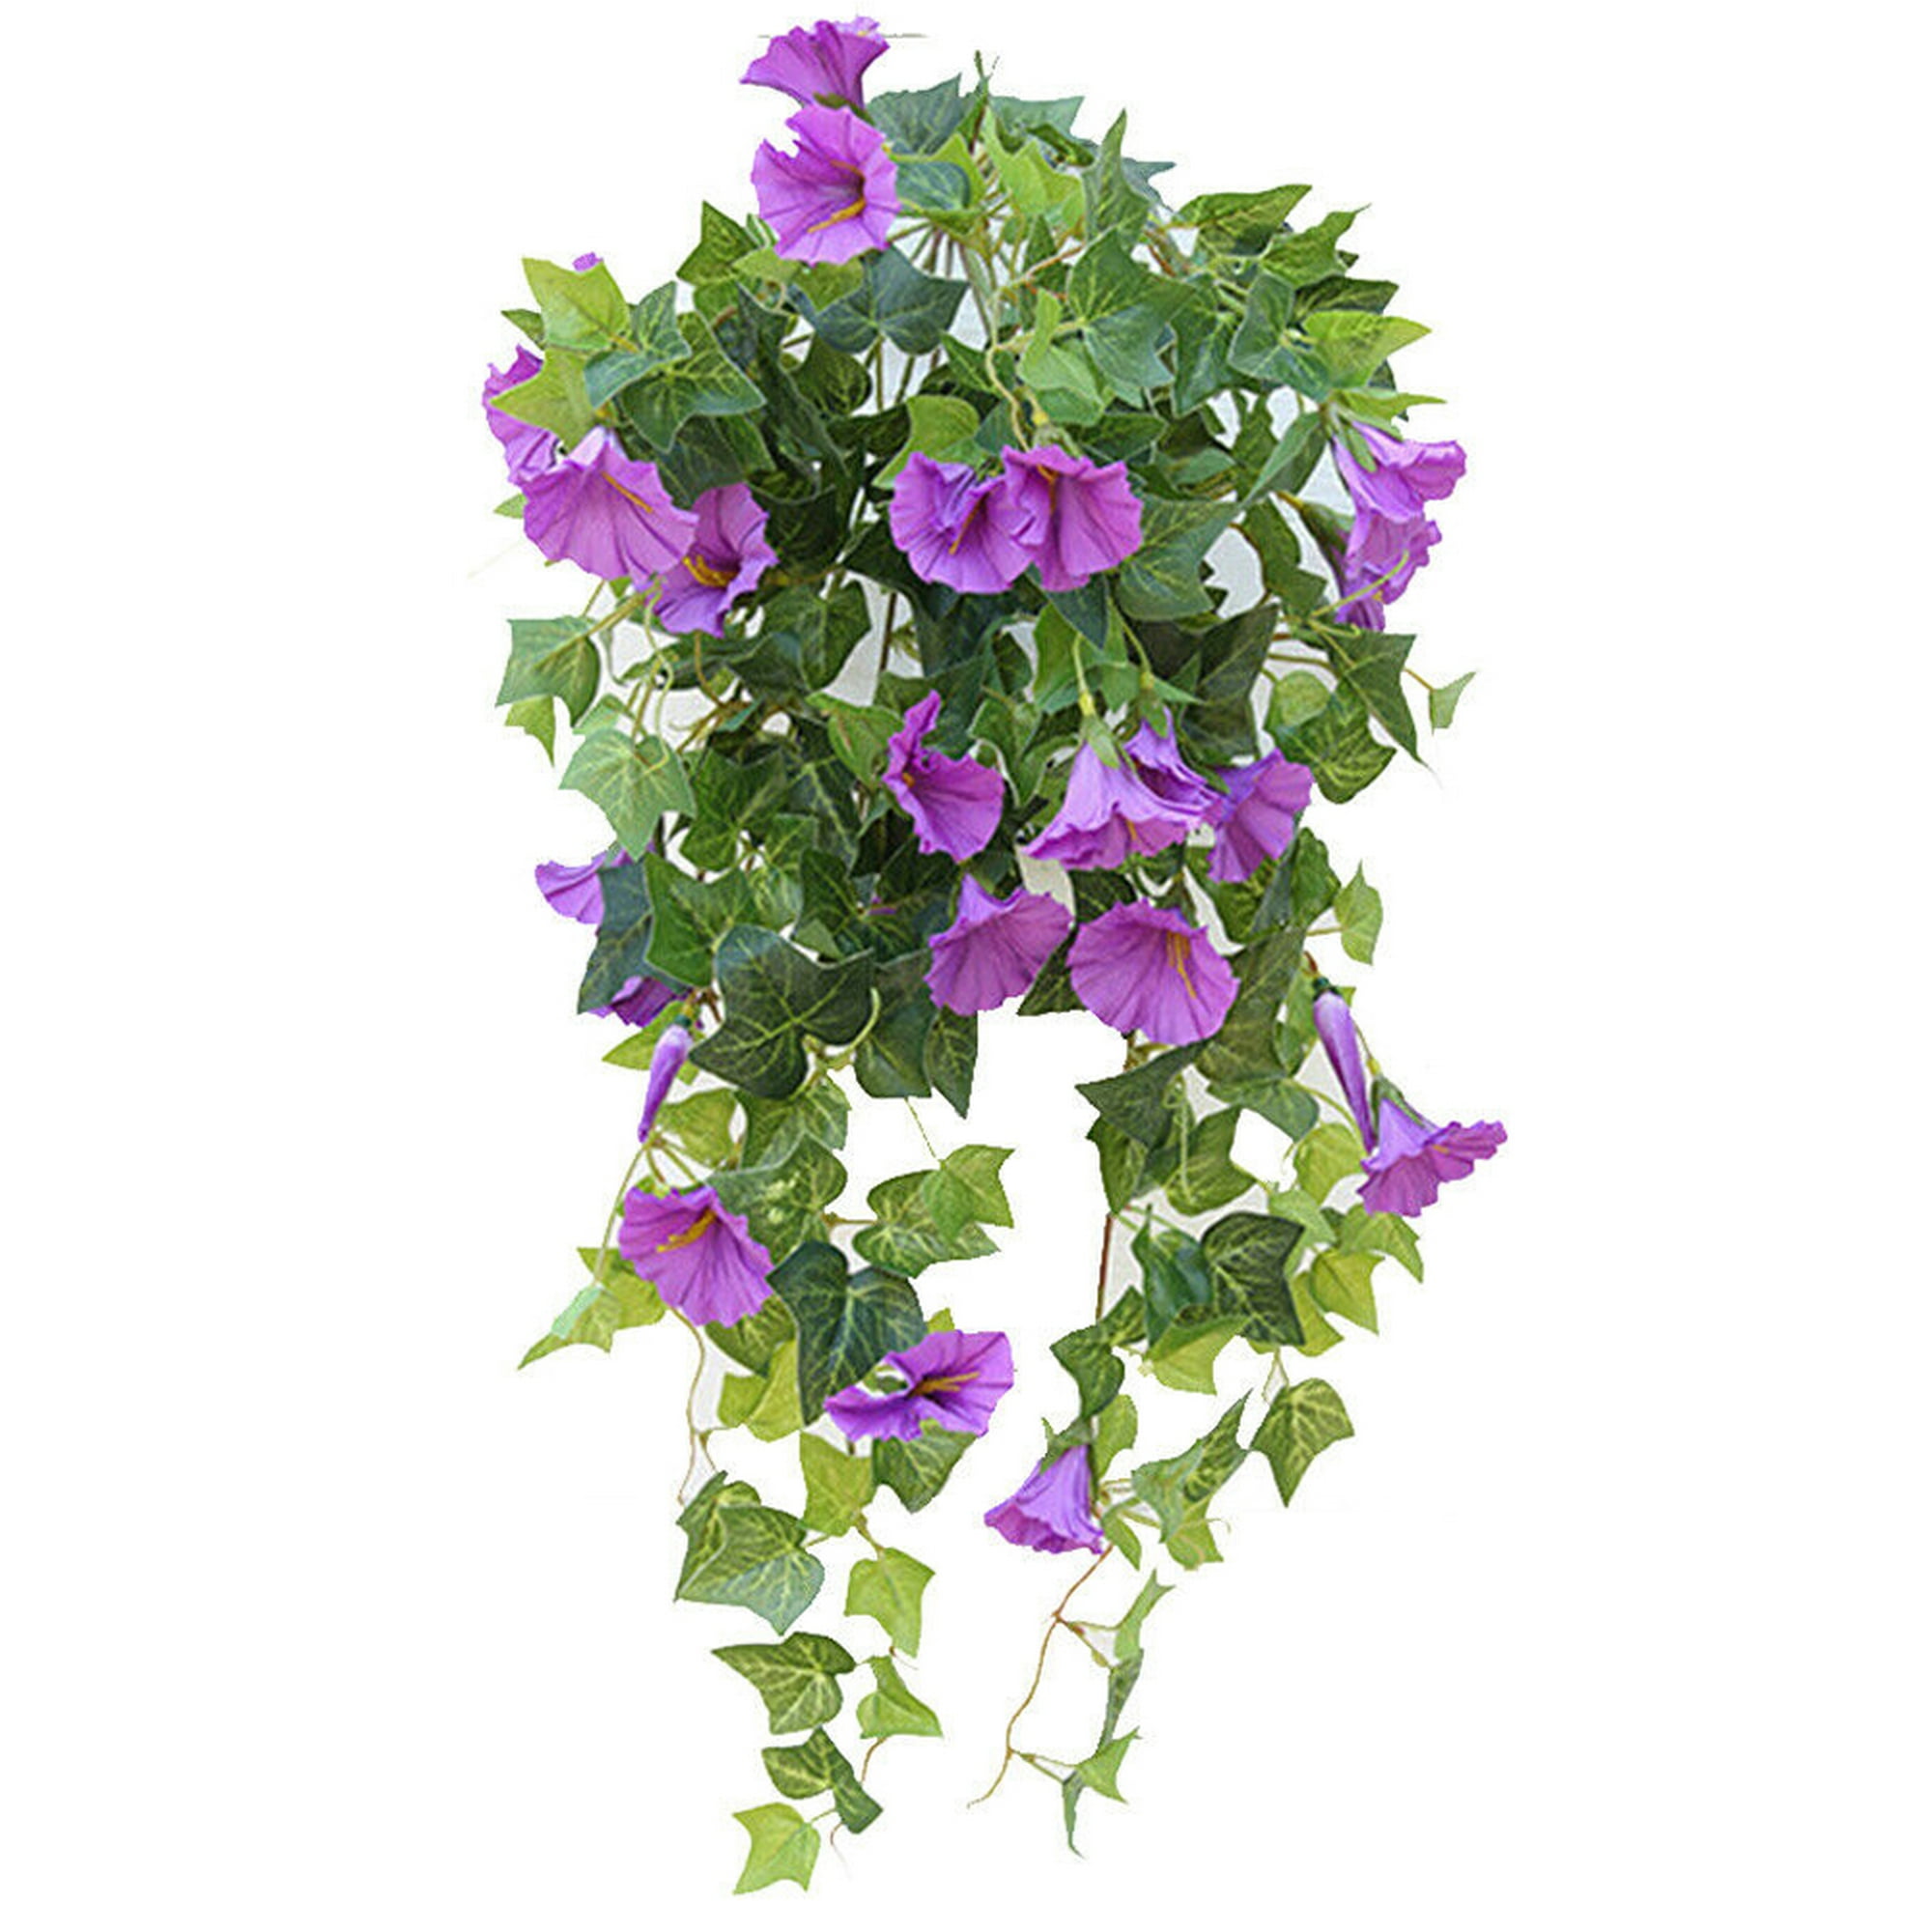 6 Bunches Artificial Morning Glory Flower Vines Hangings 